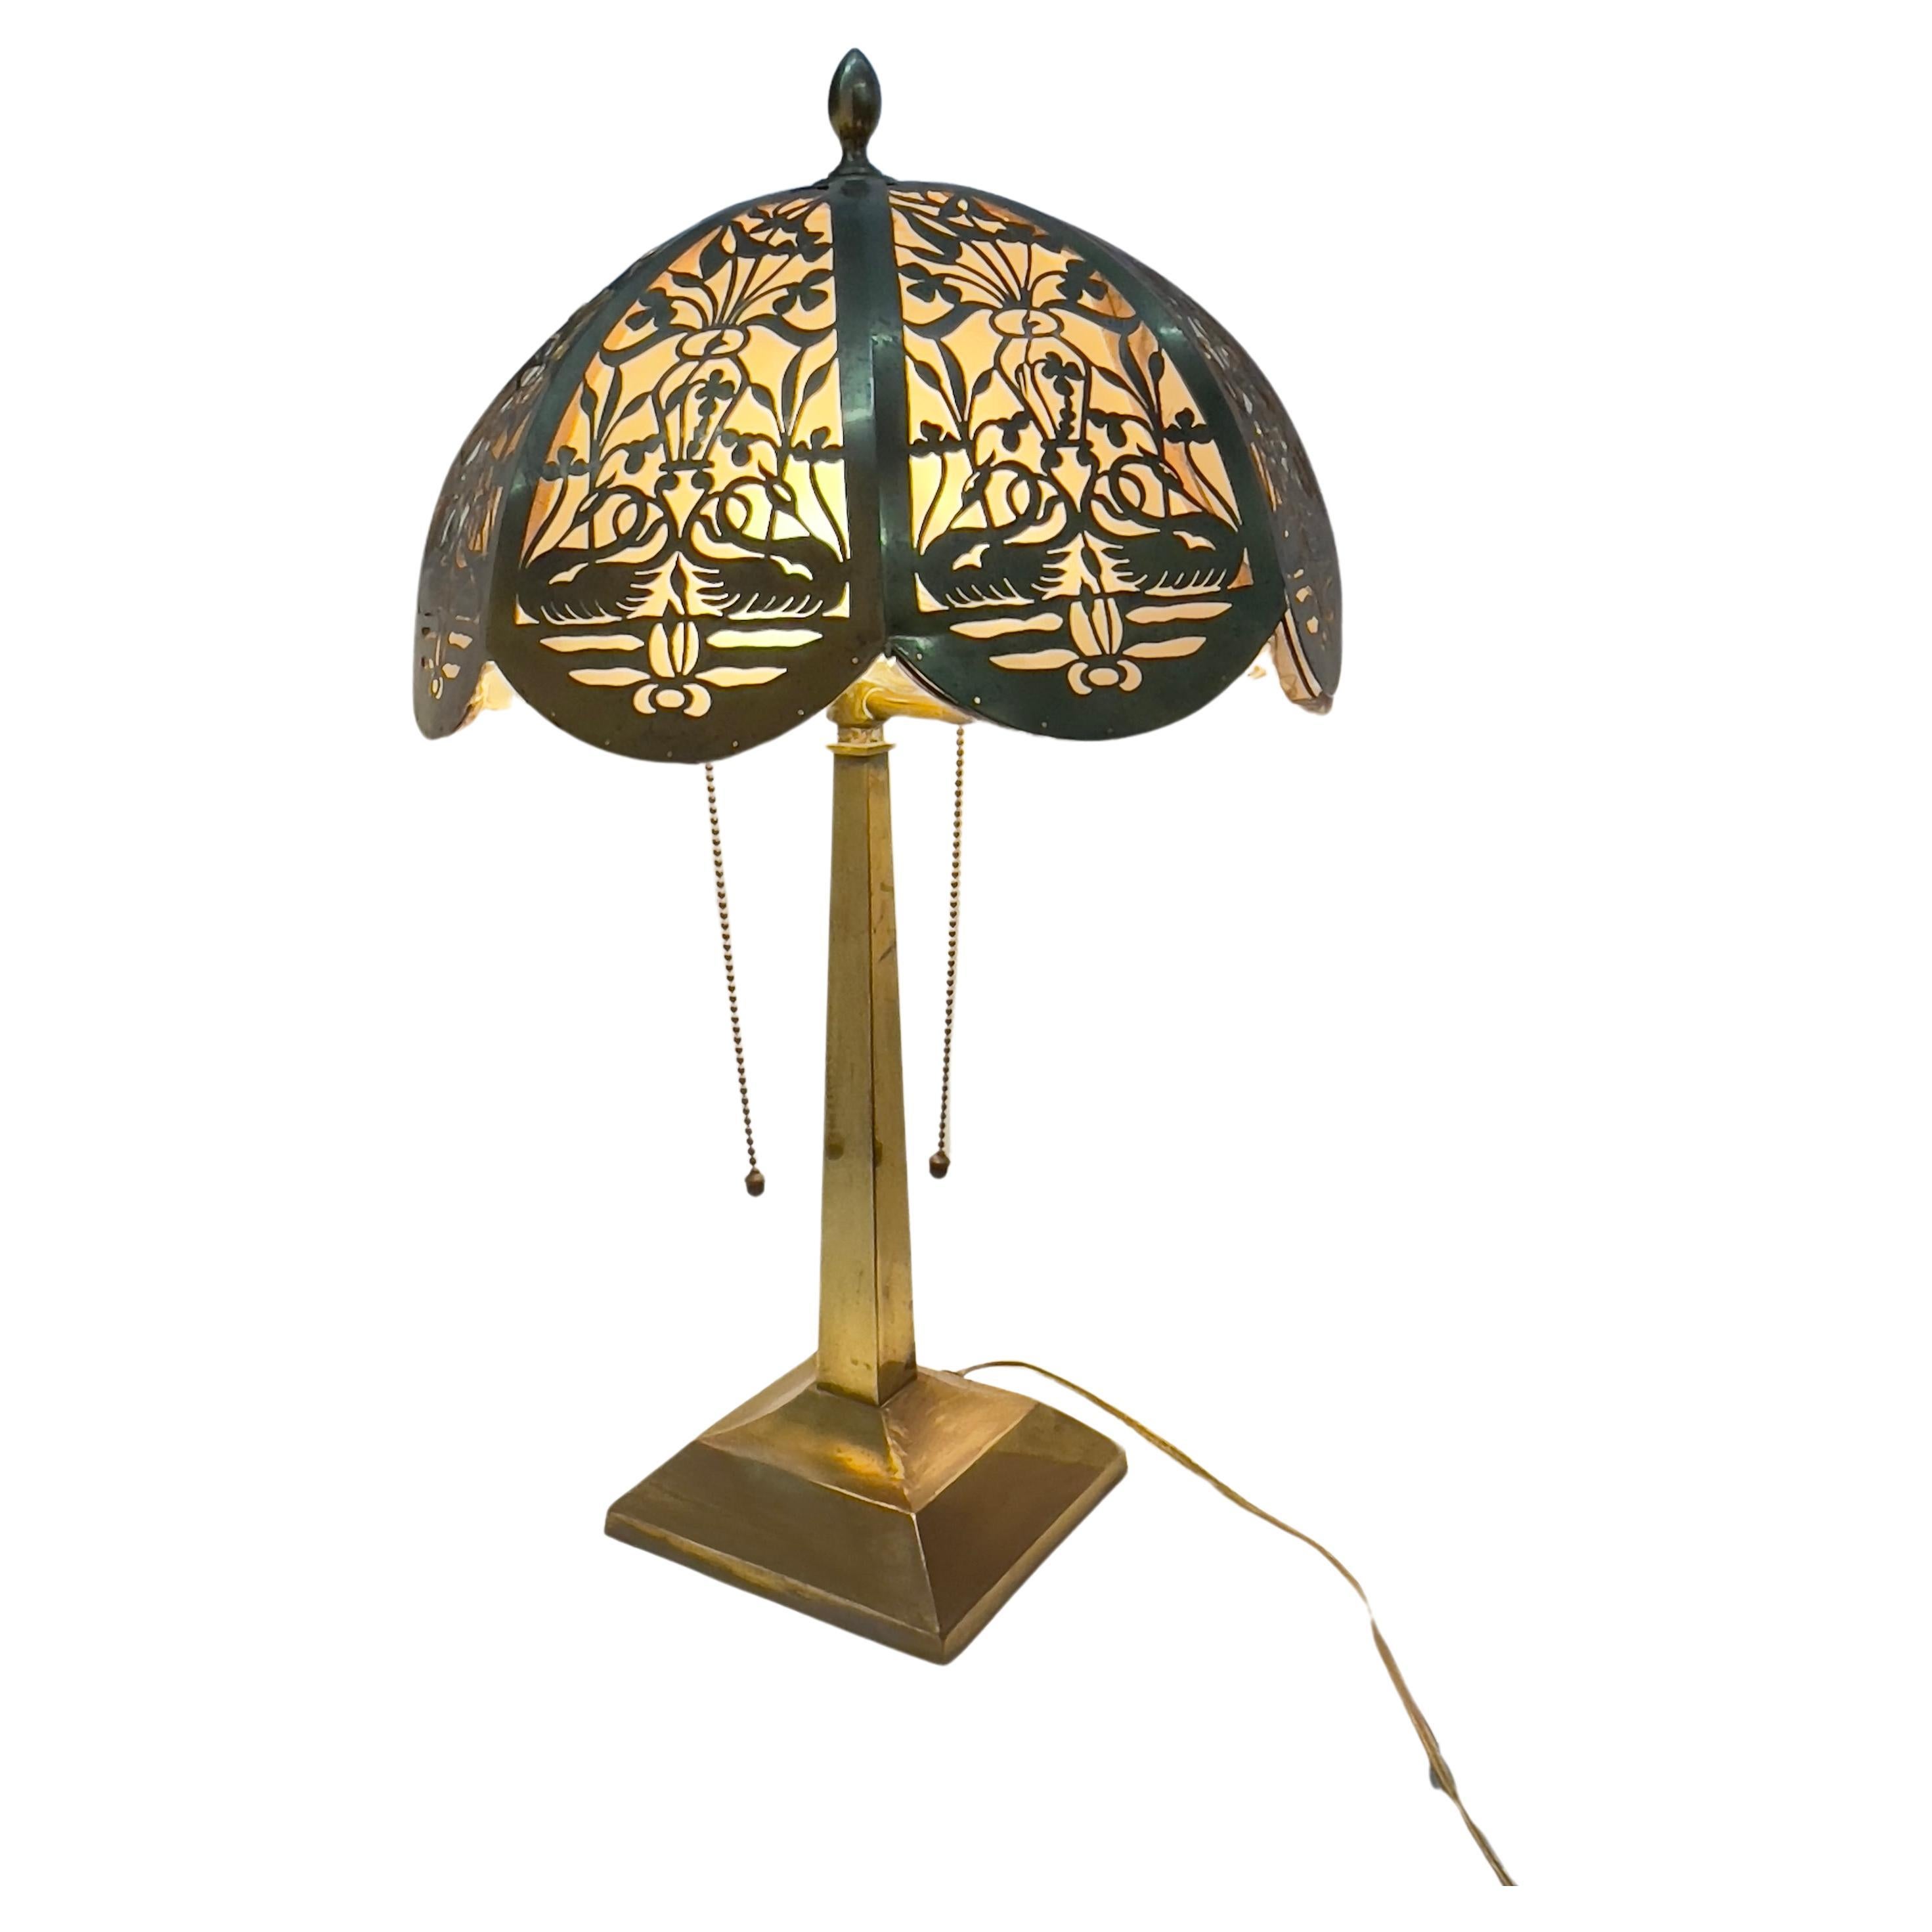 Circa 1920s Antique Brass Lamp With Reticulated Brass Lampshade